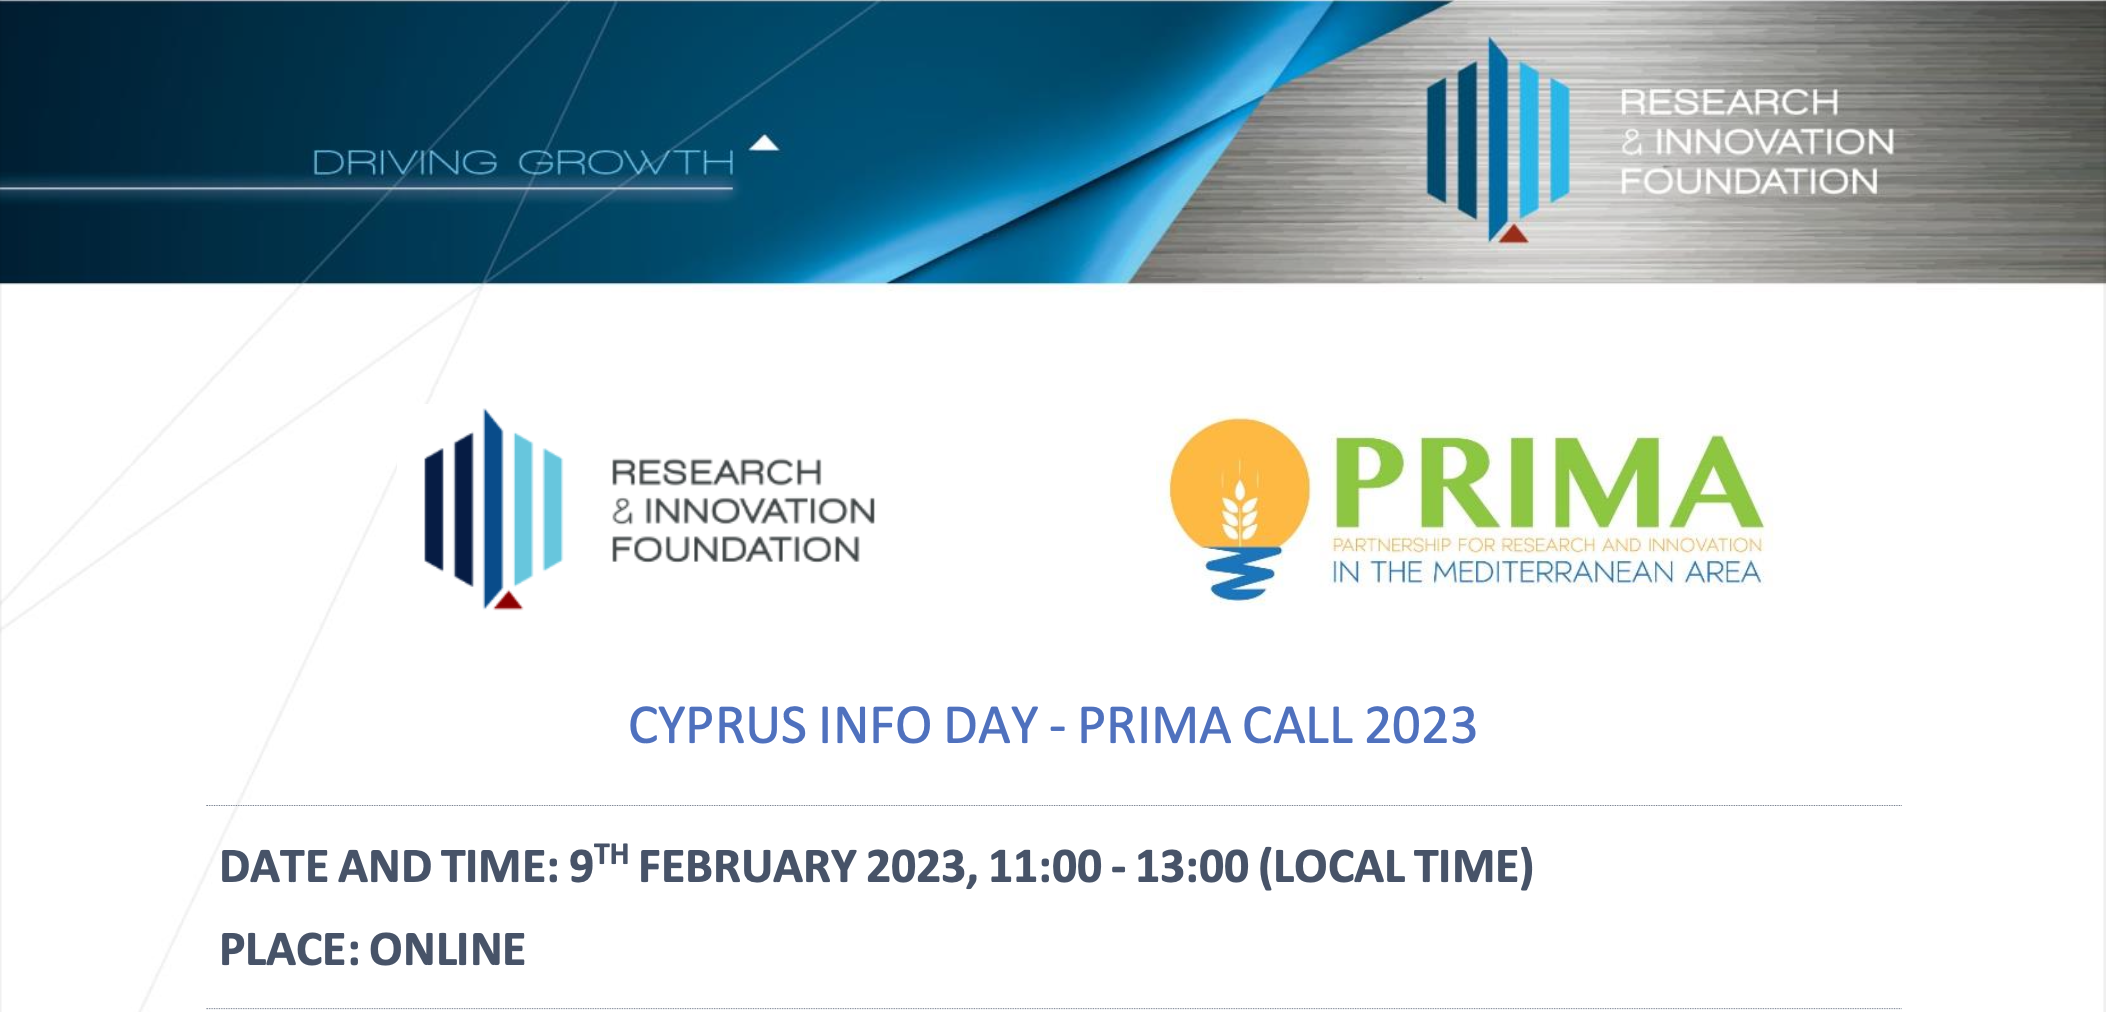 AGREEMAR presented by the Cypriot partners at the Cyprus Info Day – PRIMA 2023 event